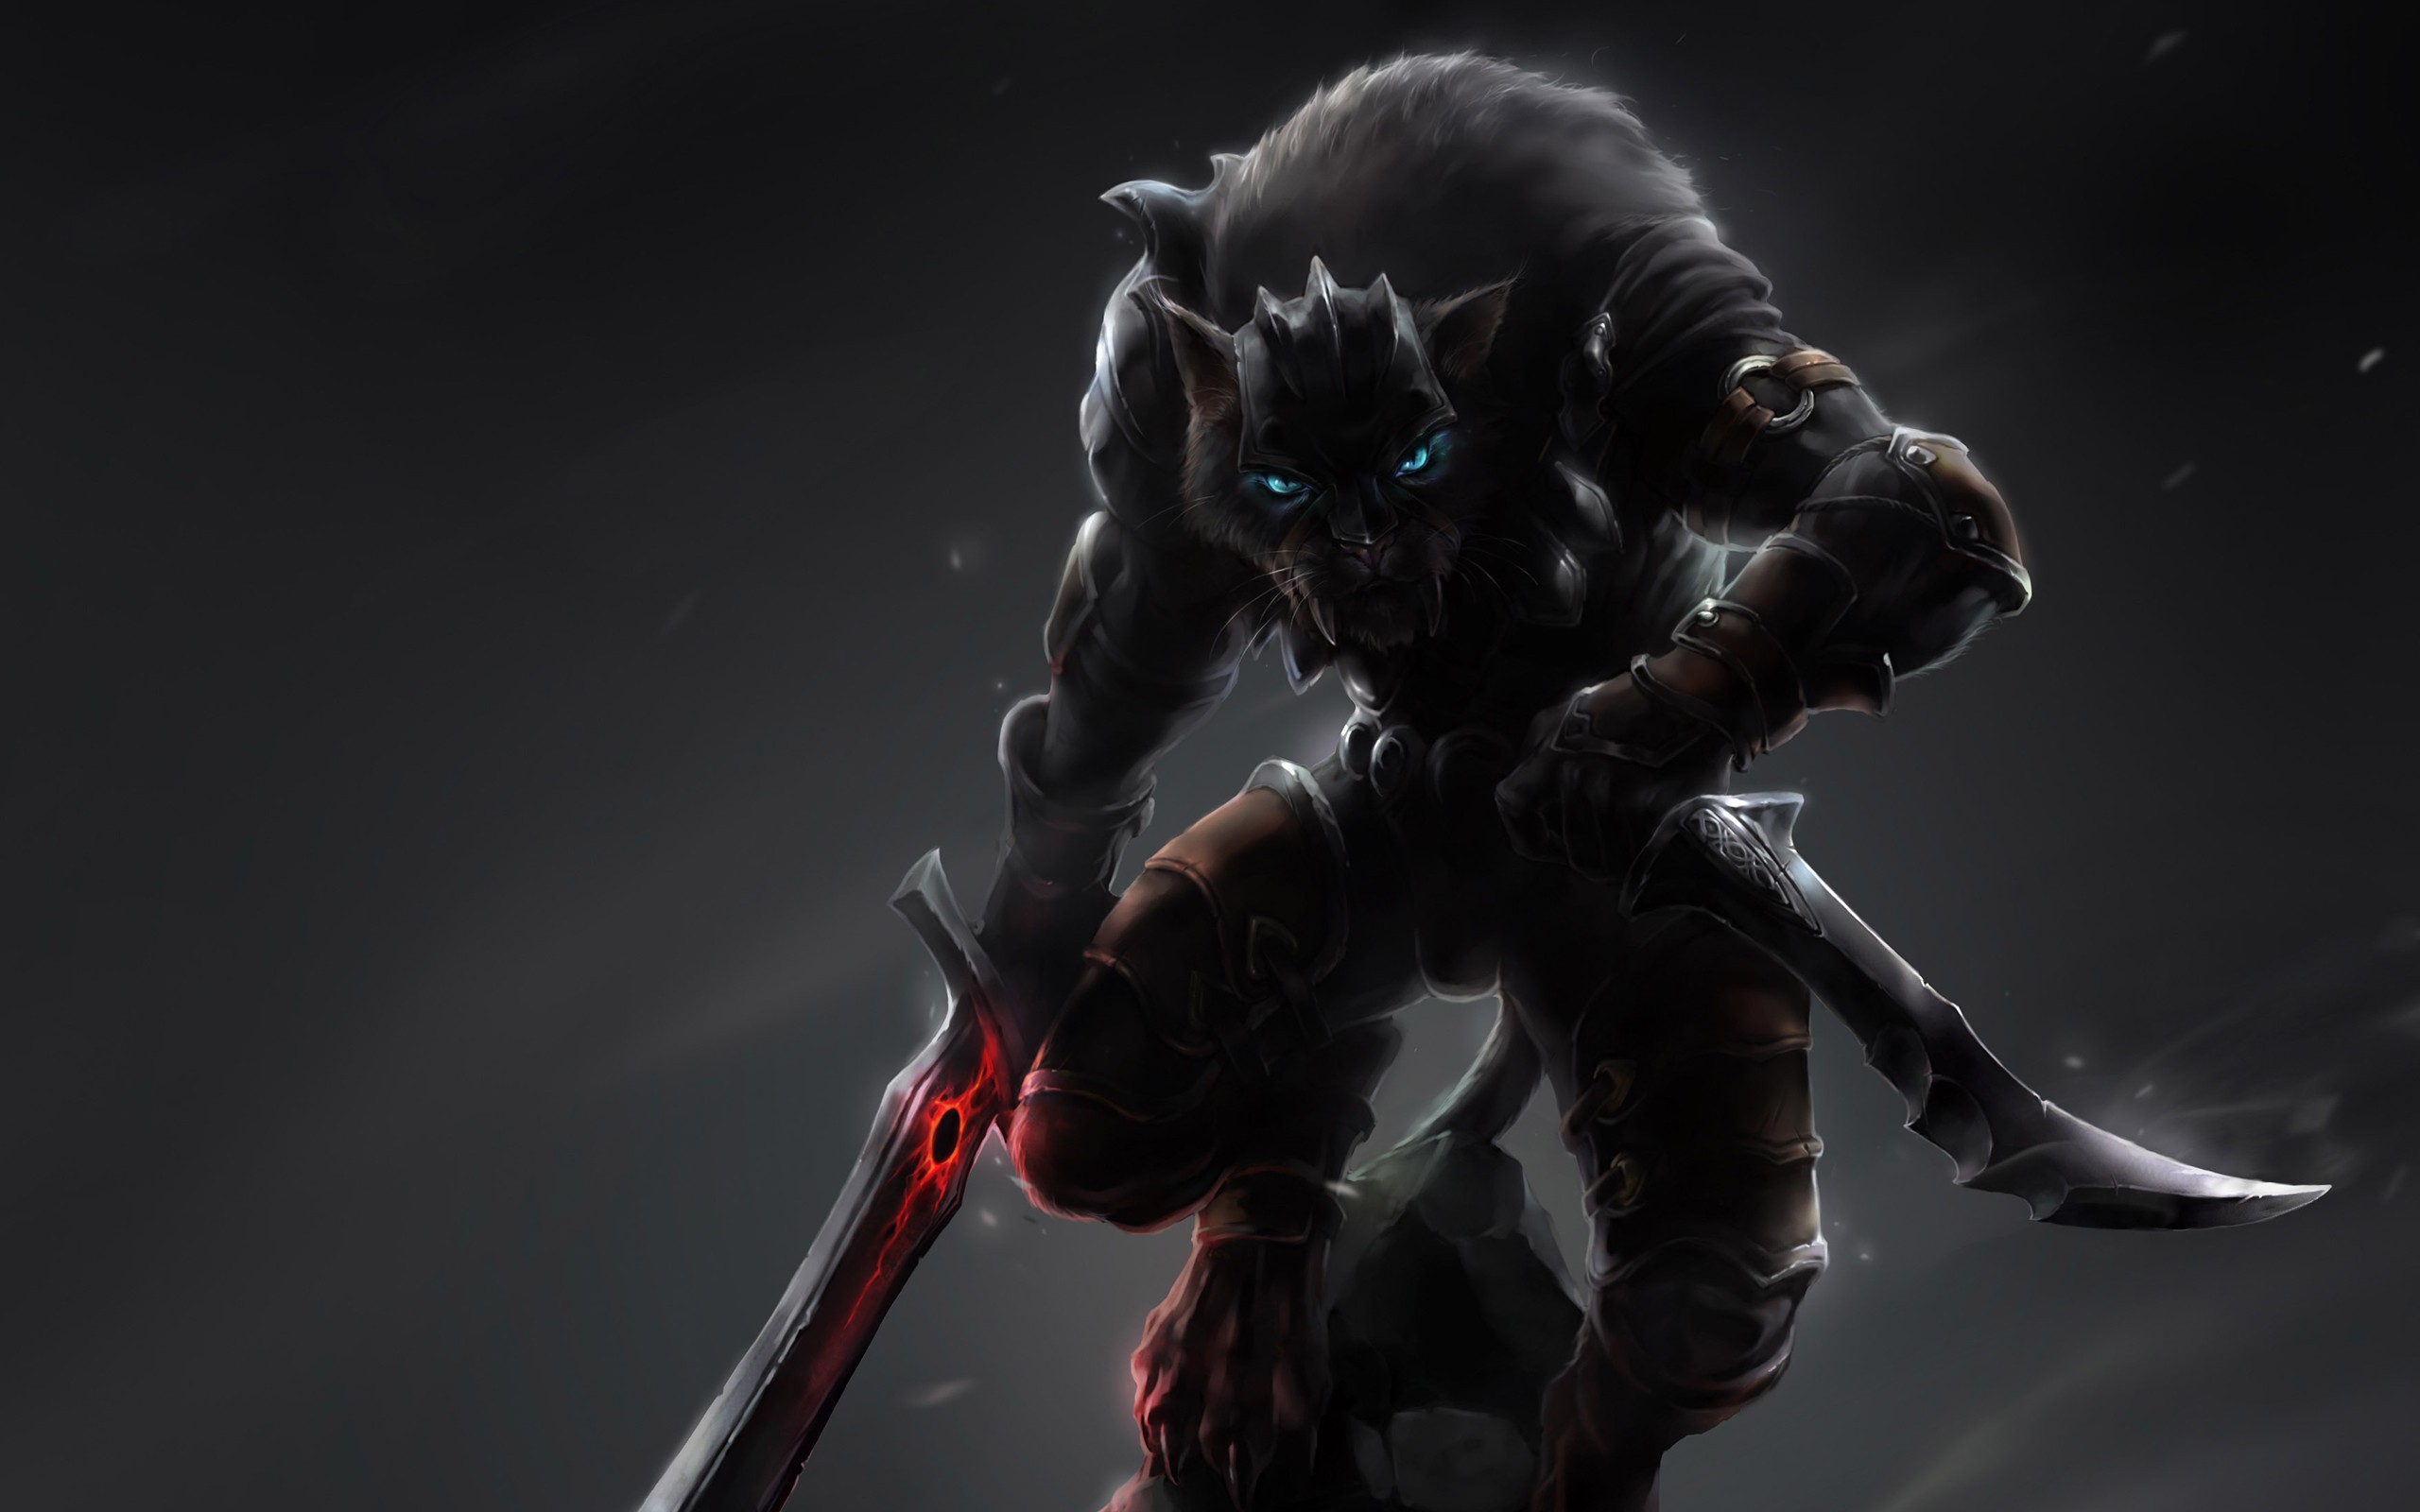 Awesome Warrior HD Wallpaper Free Download